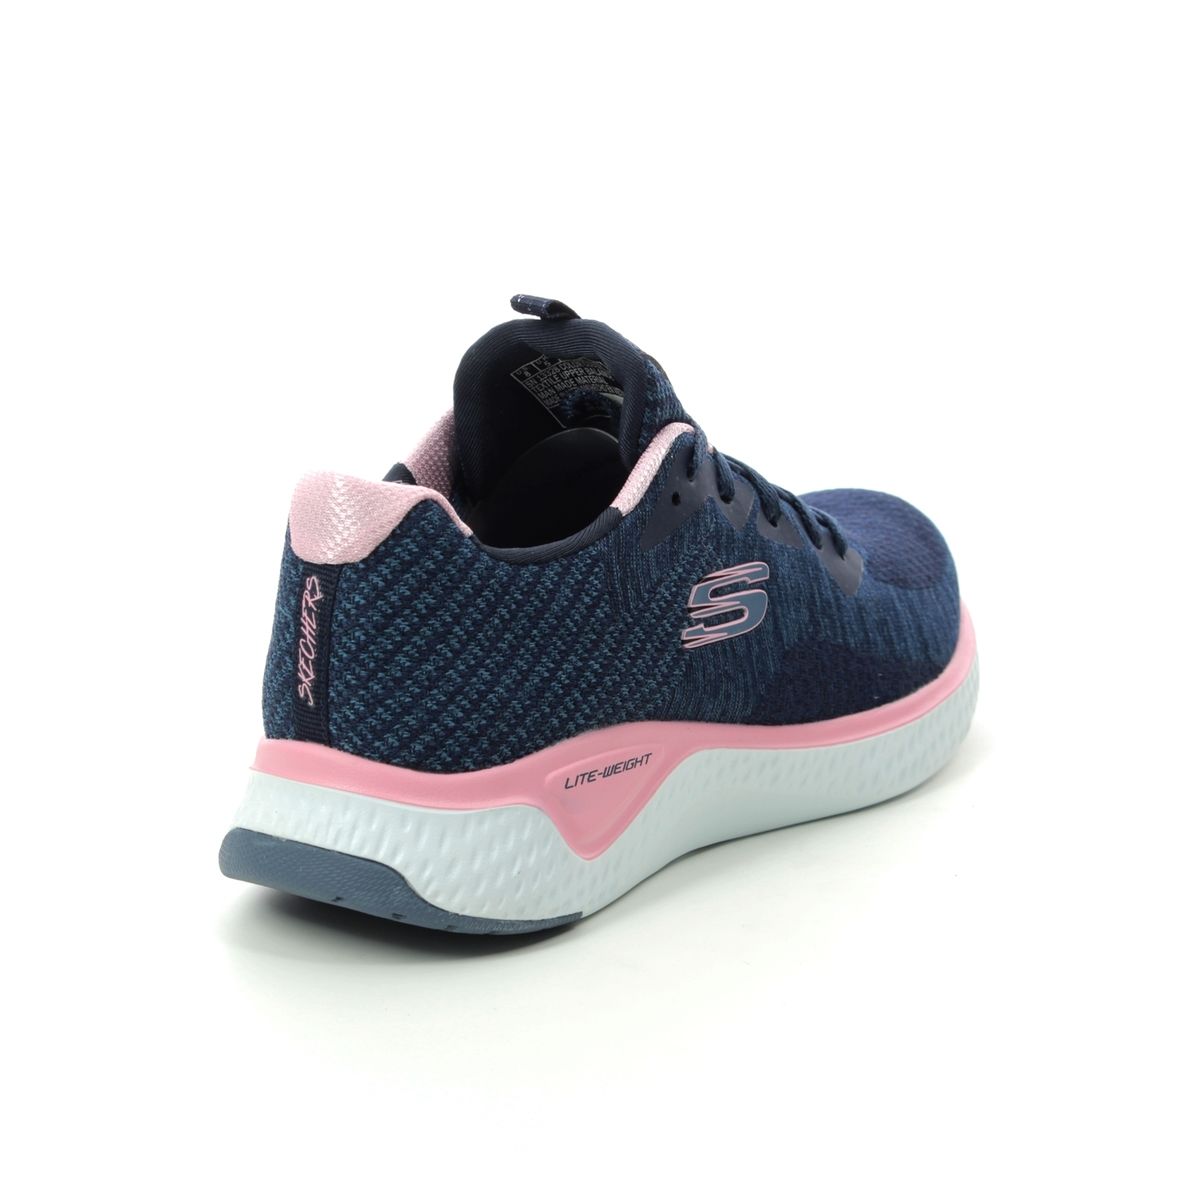 skechers trainers pink